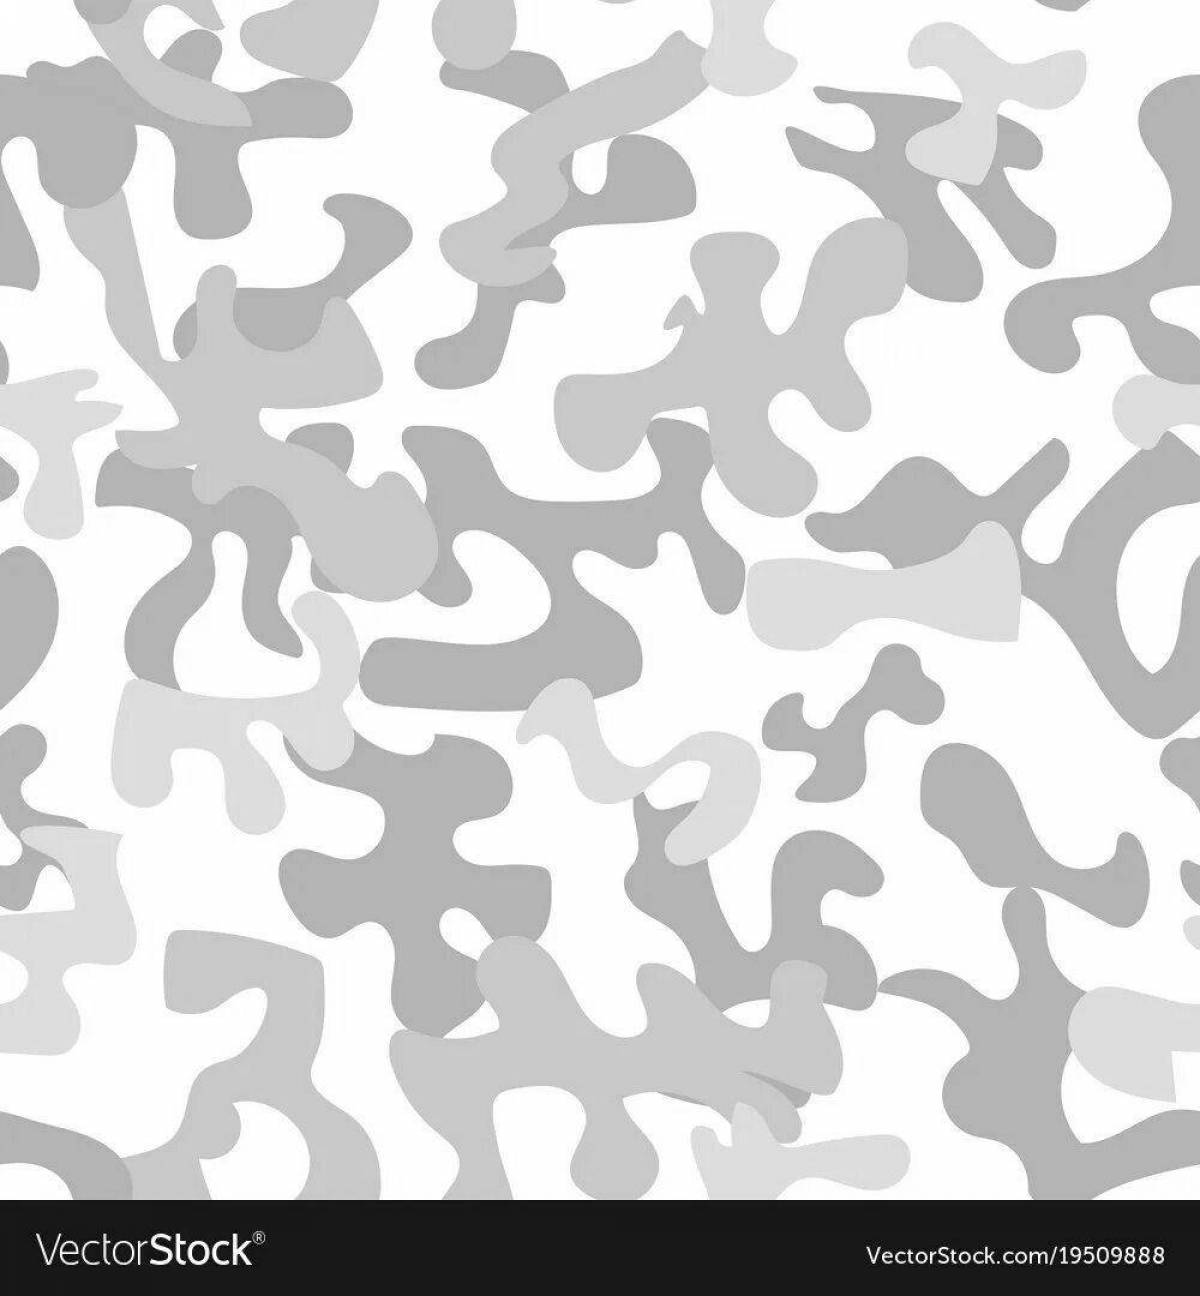 Coloring page with stylish camouflage pattern